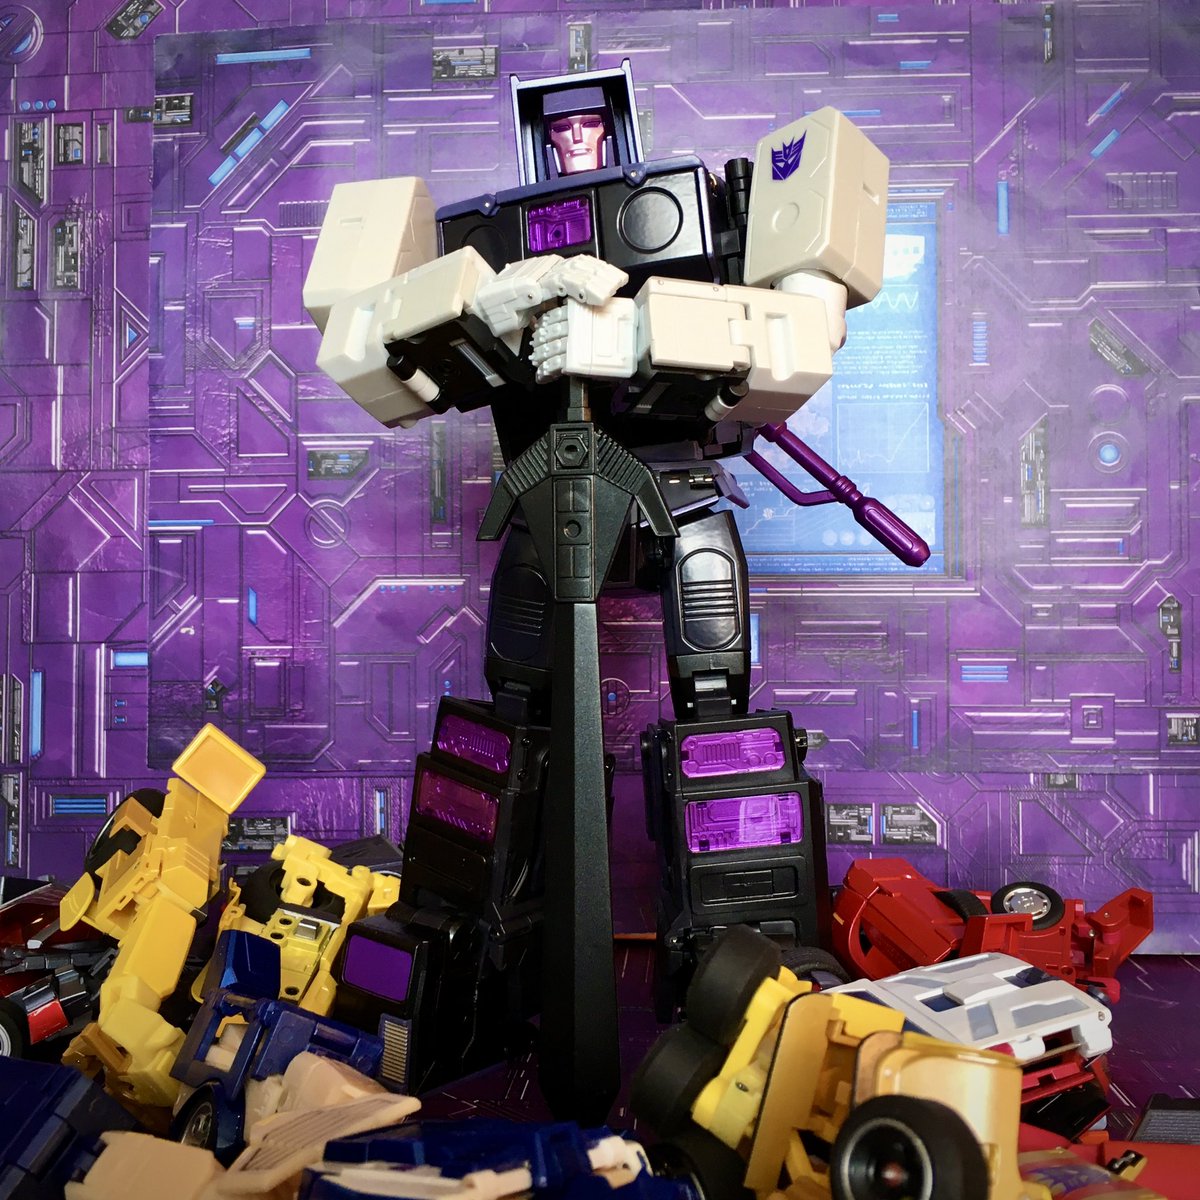 When you find out that the rest of your team hates your guts 😆

#throwbackthursday #tbt #Transformers #toys #Stunticons #Decepticons #Xtransbots